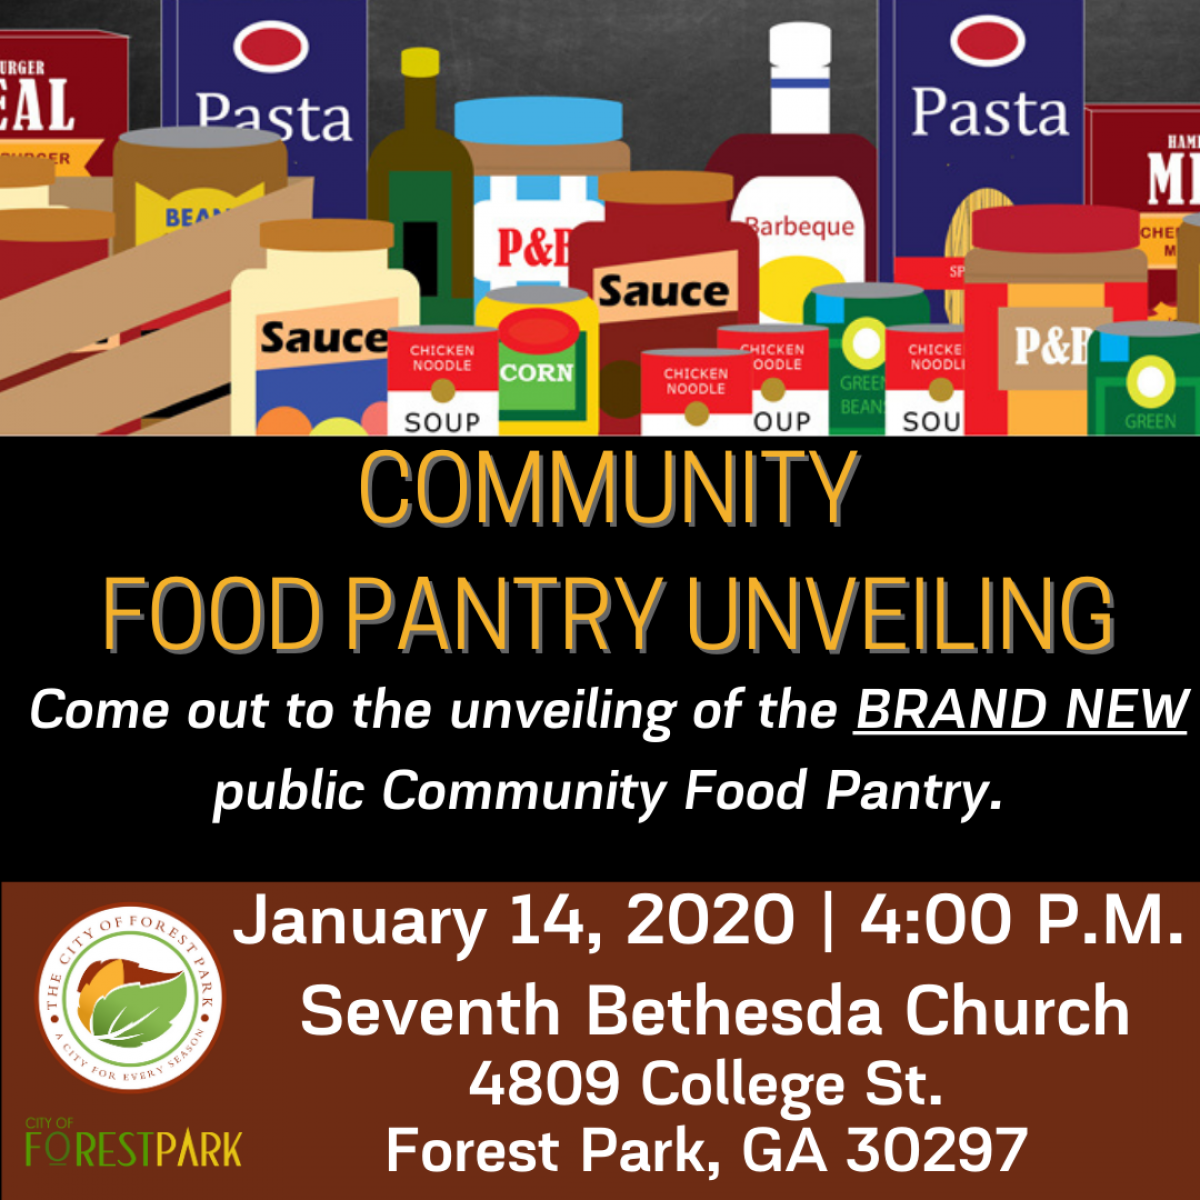 Community Food Pantry Unveiling | Forest Park, GA